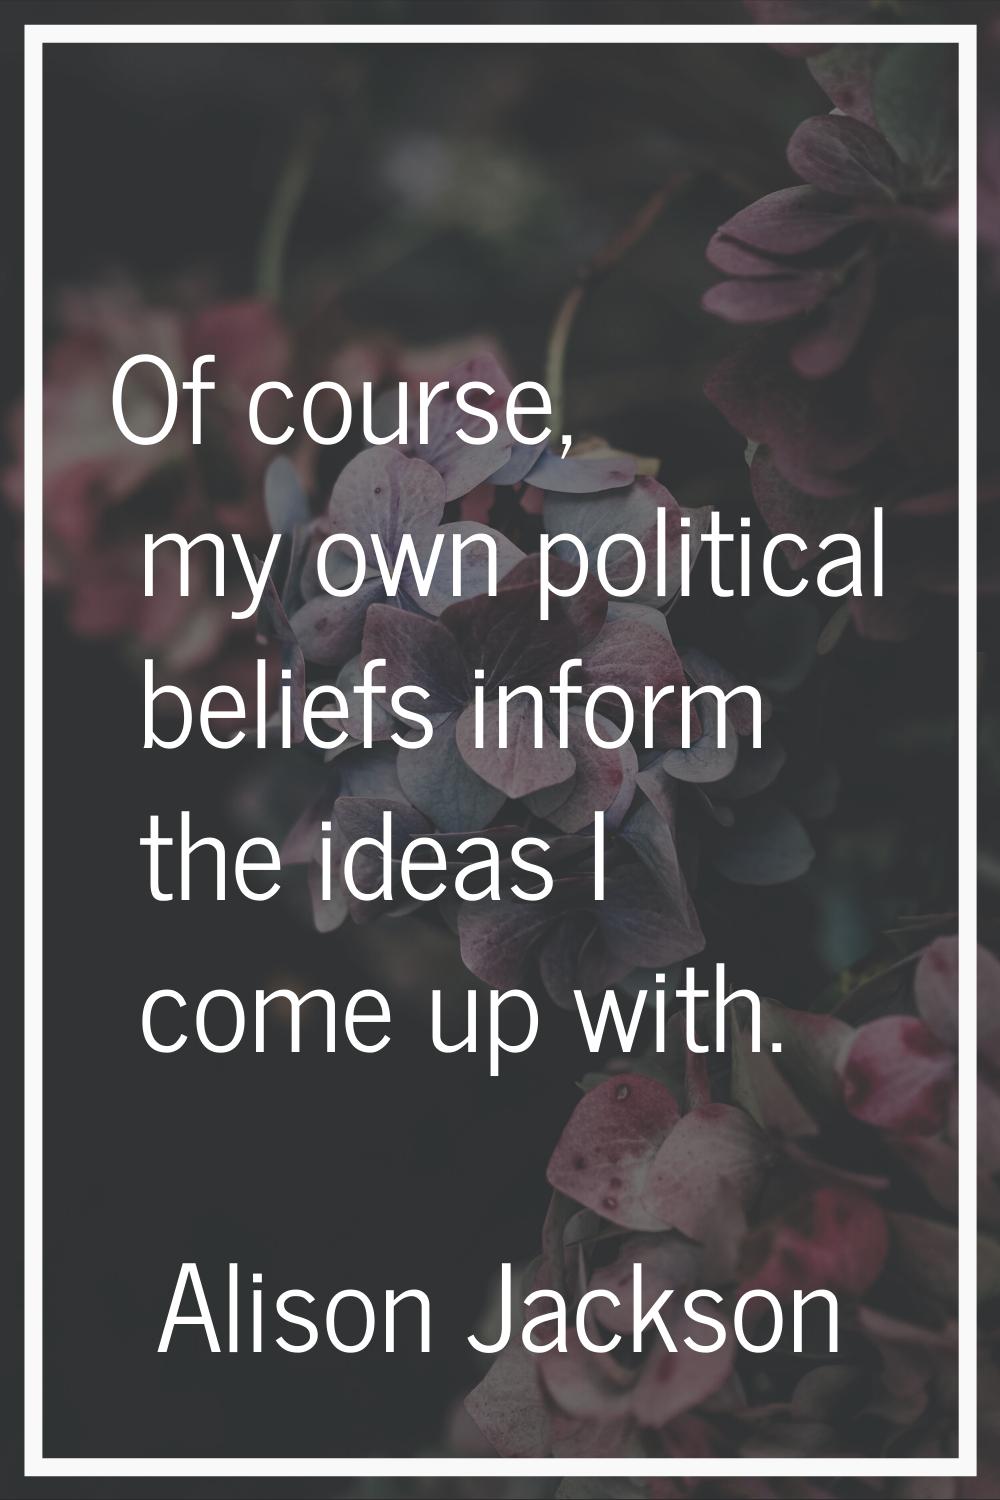 Of course, my own political beliefs inform the ideas I come up with.